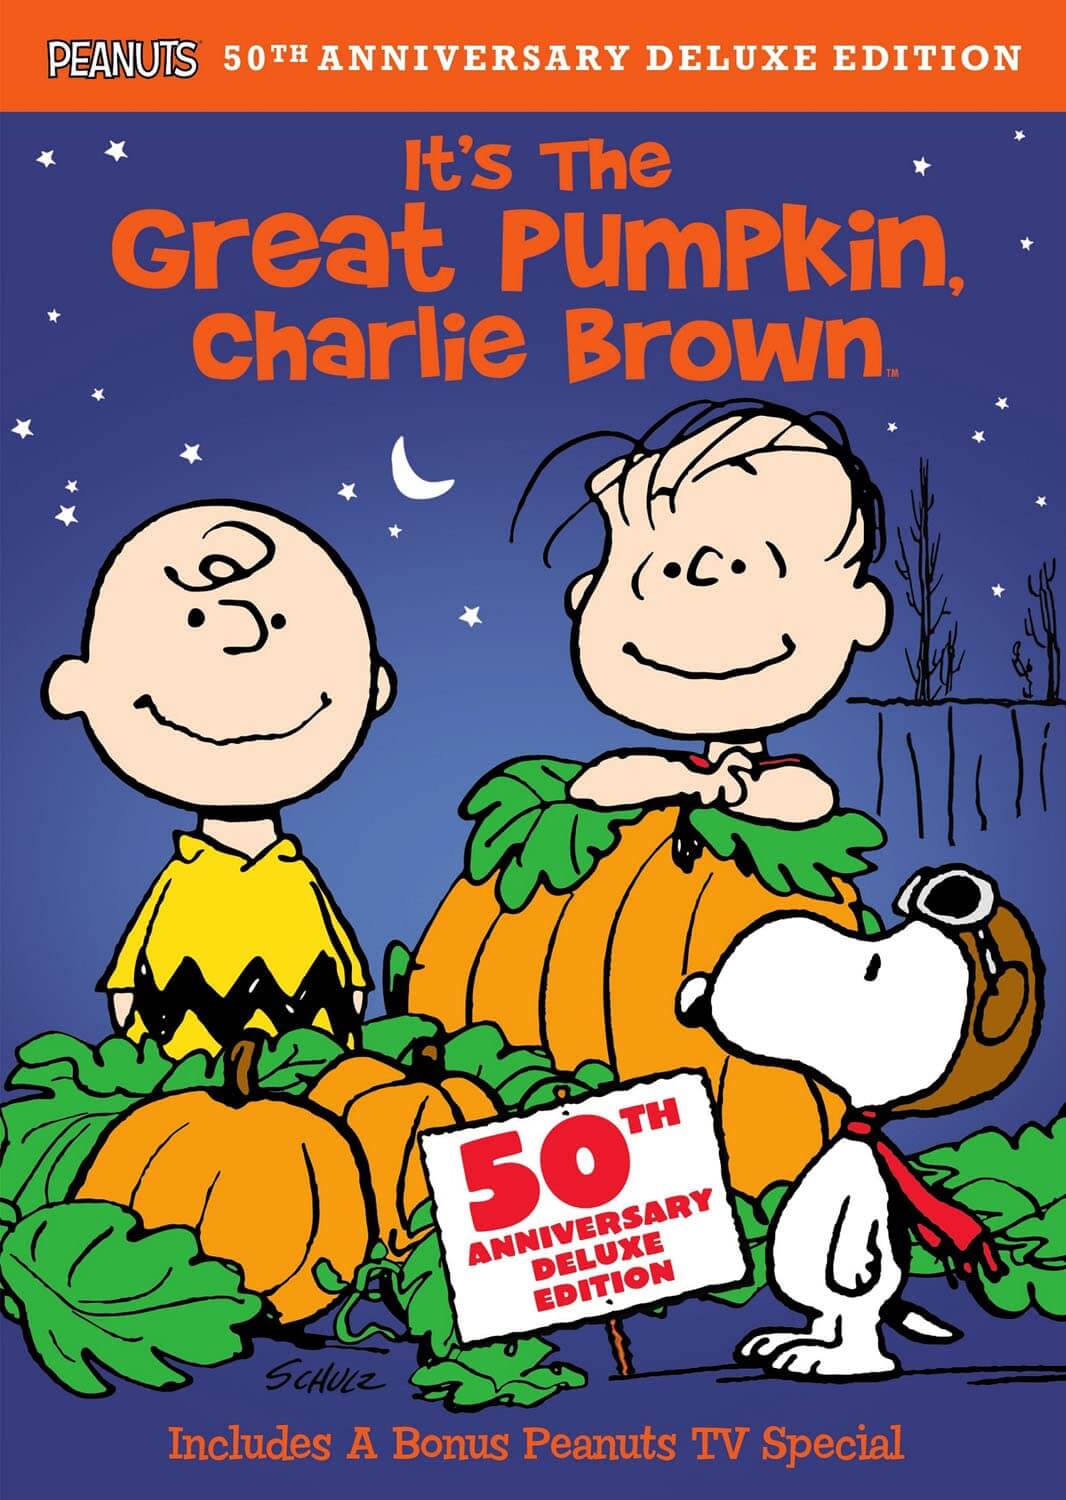 "It's the Great Pumpkin, Charlie Brown" (1966)